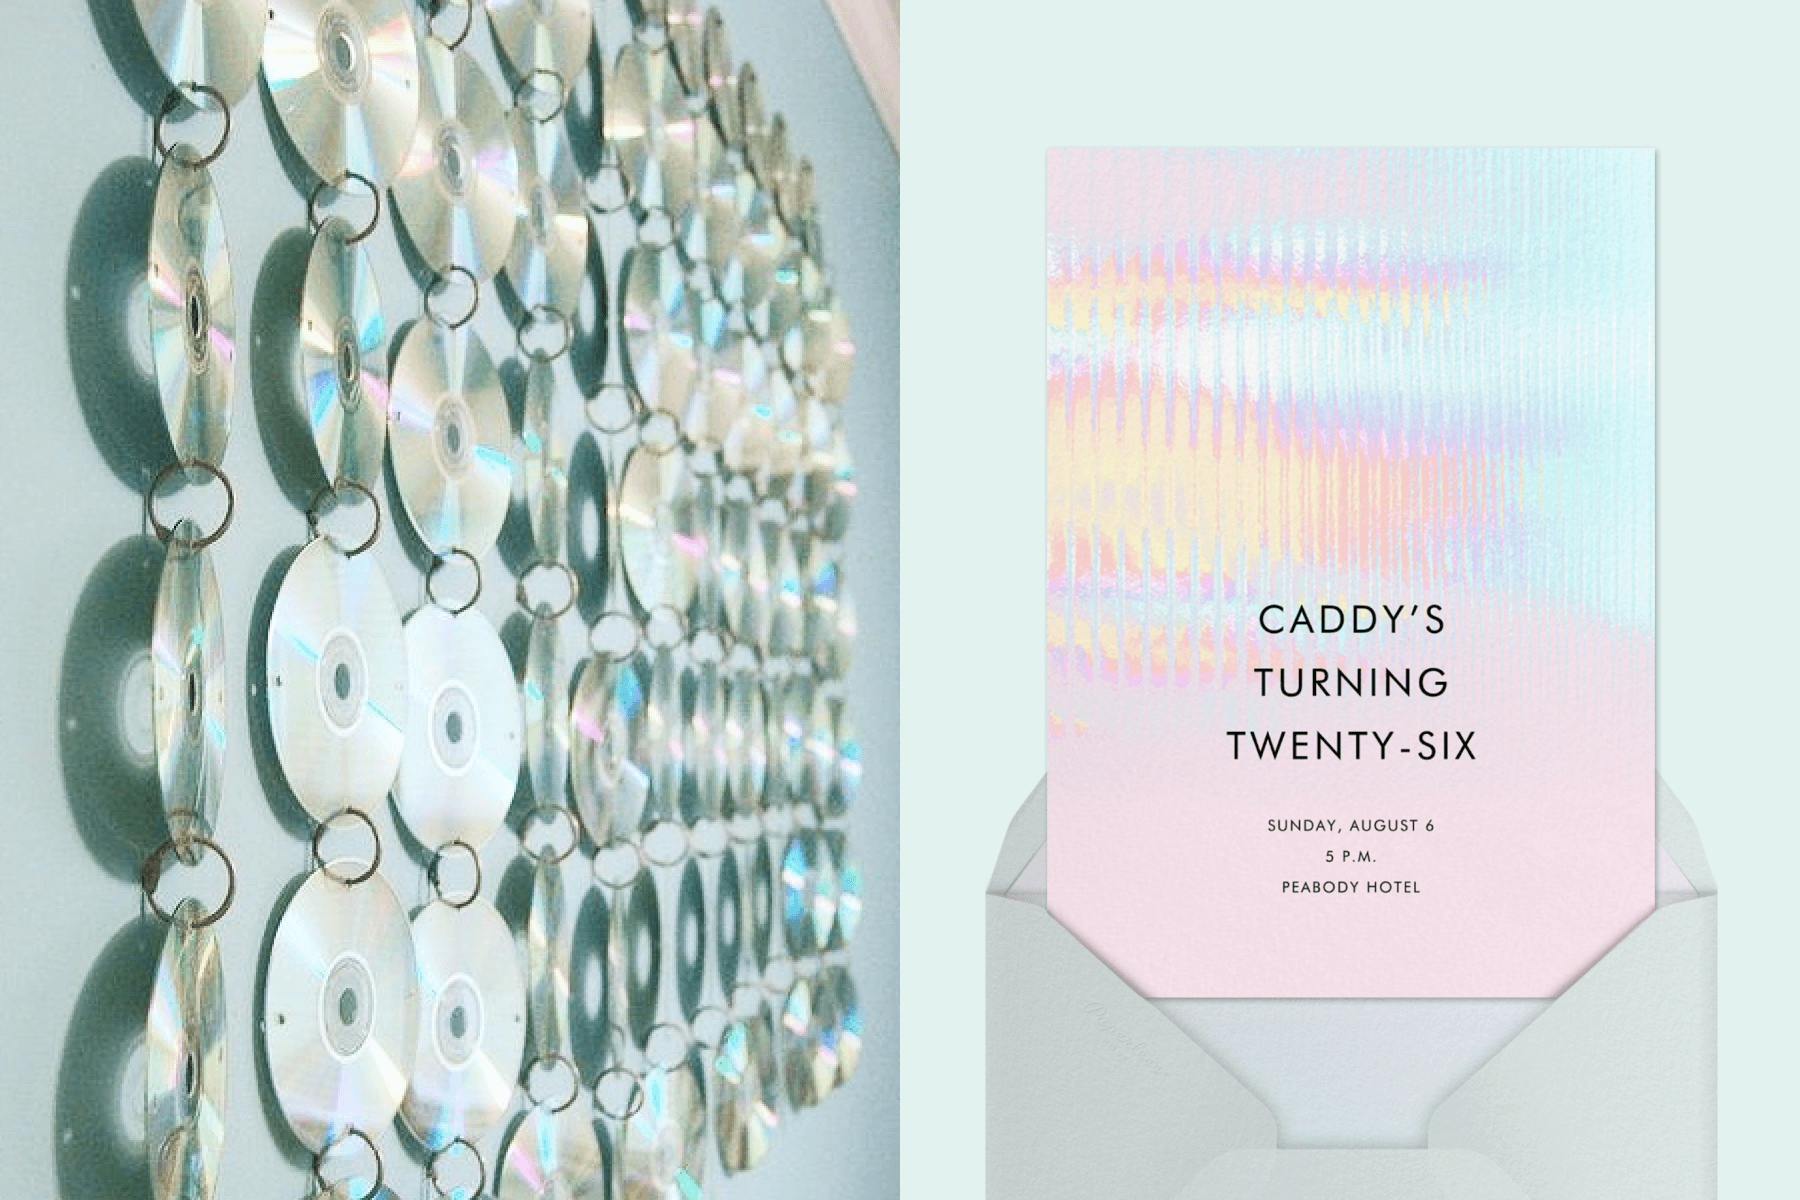 Alt text, left: CDs hang backwards artfully on a wall. Right: An invitation with abstract pastel patterns.